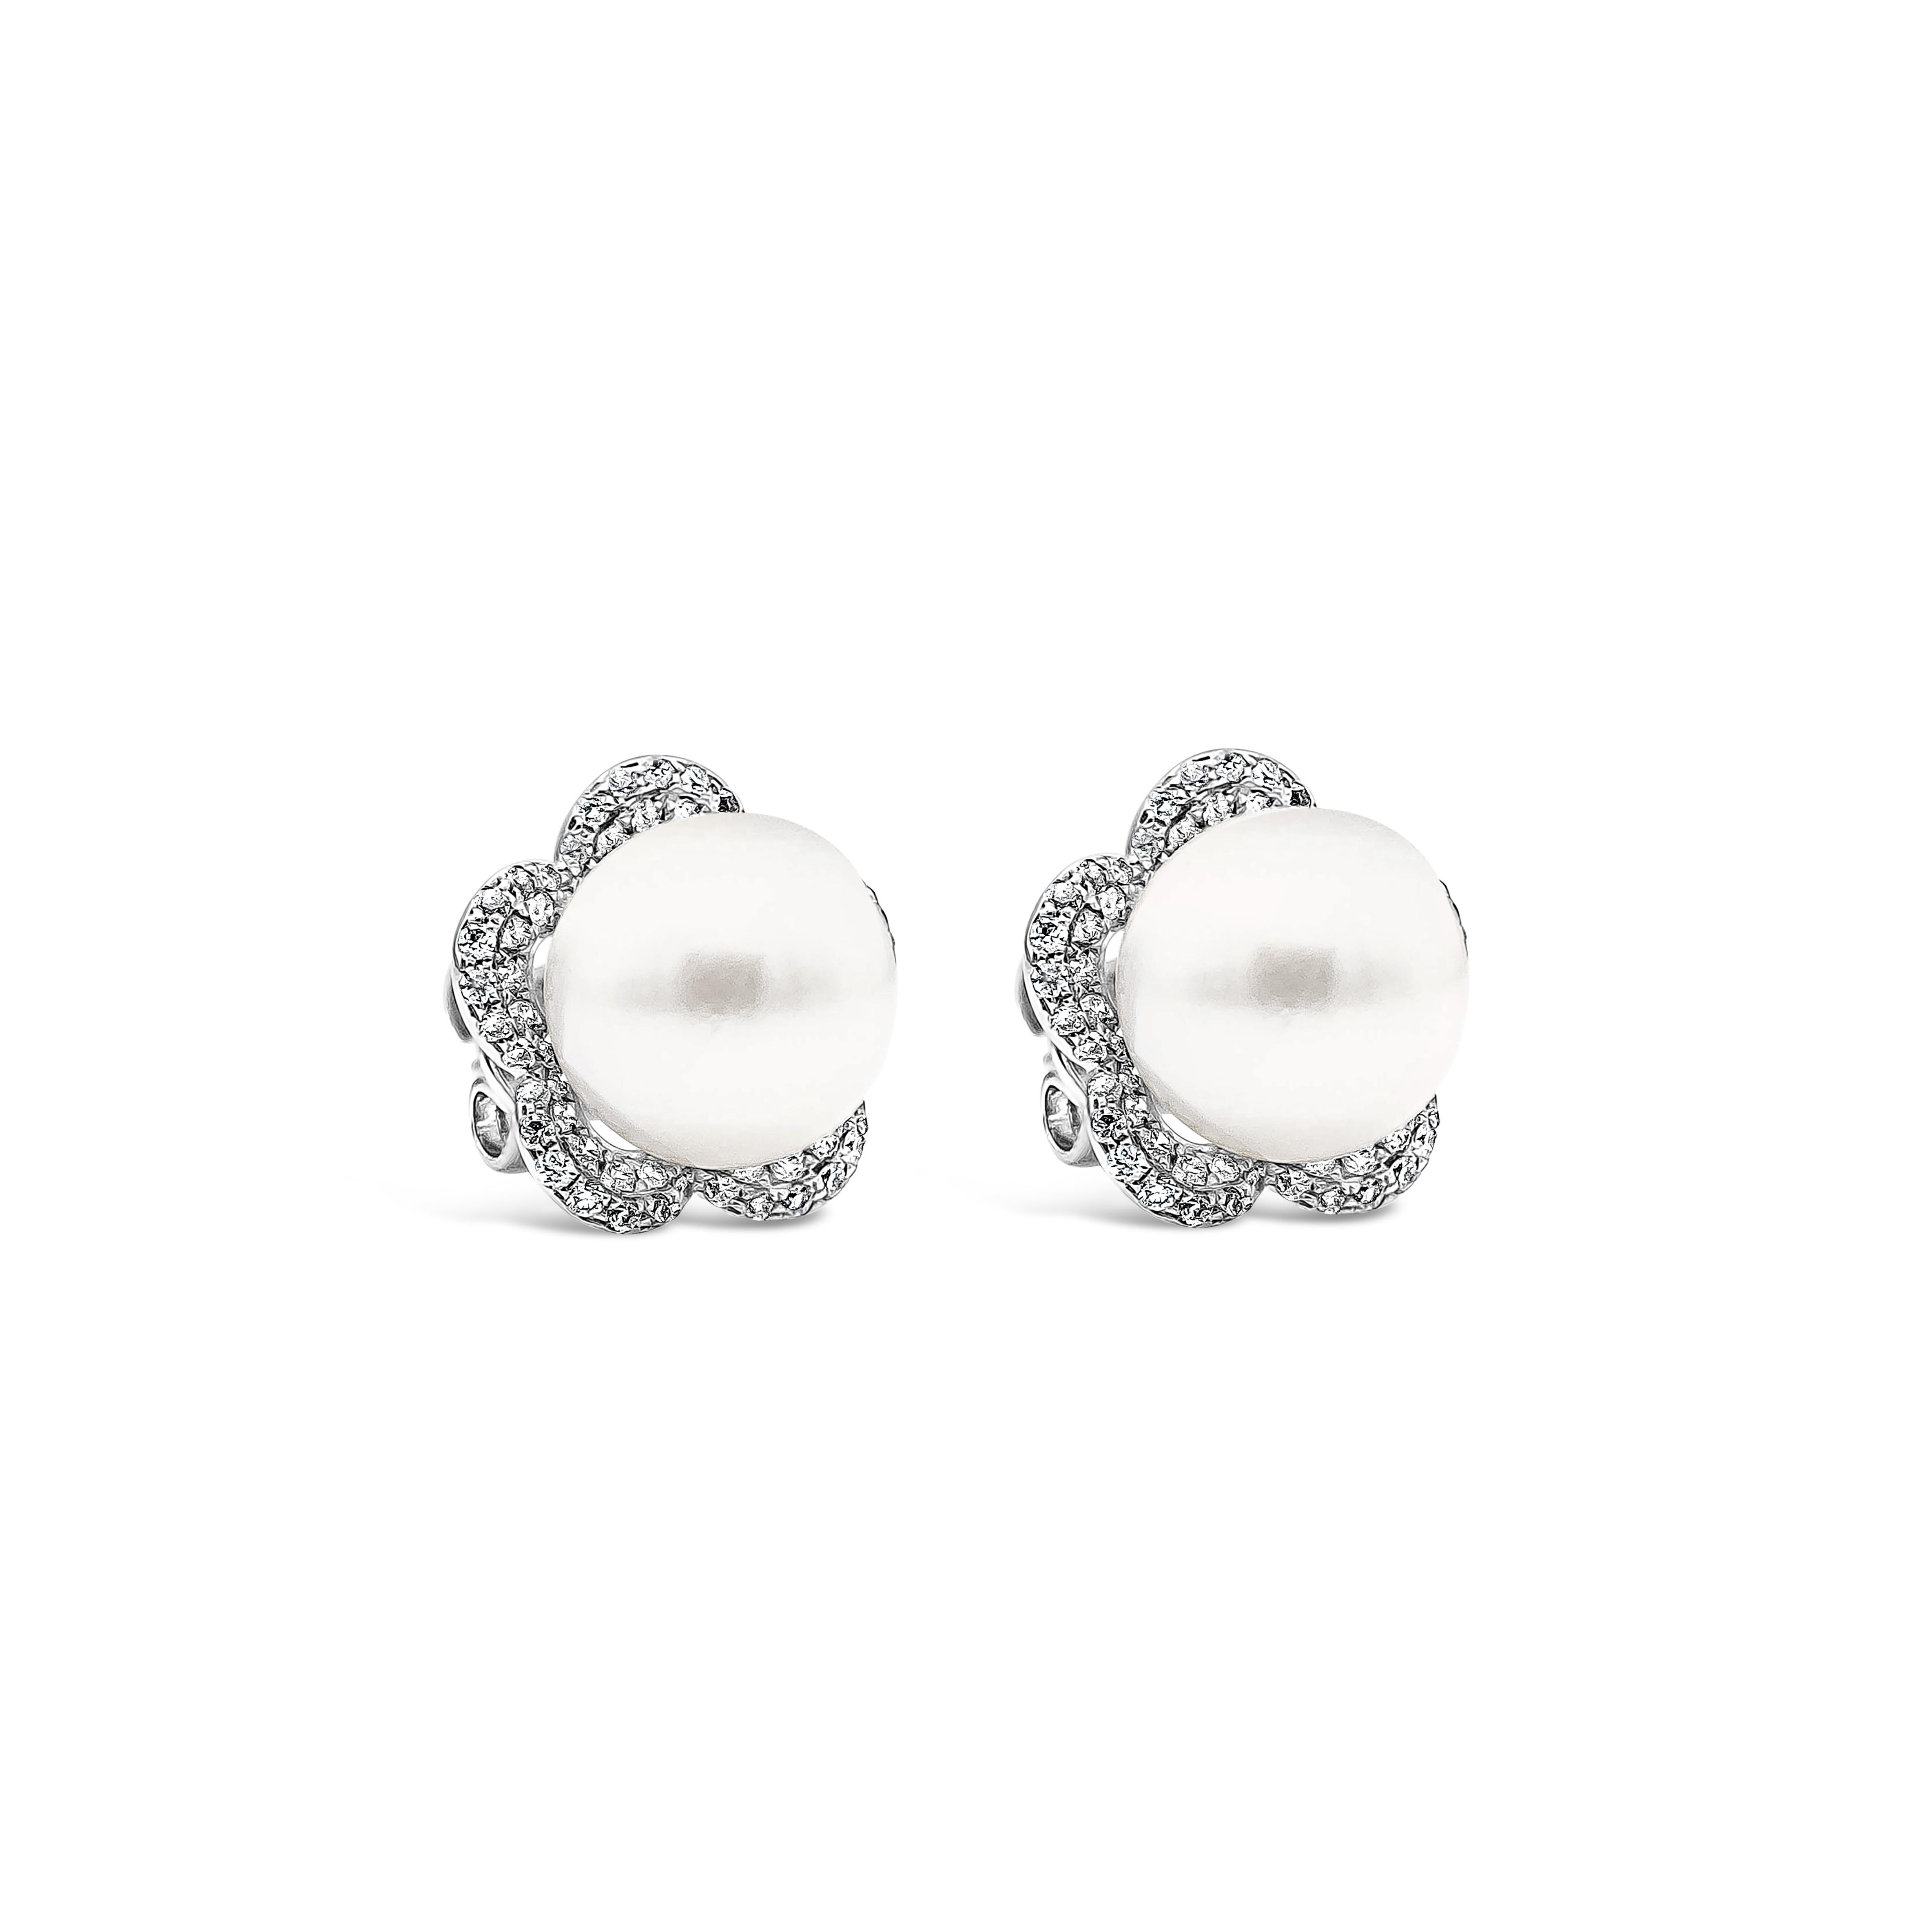 Contemporary Roman Malakov 0.73 Carats Total Round Diamond & White Pearl Flower Stud Earrings For Sale